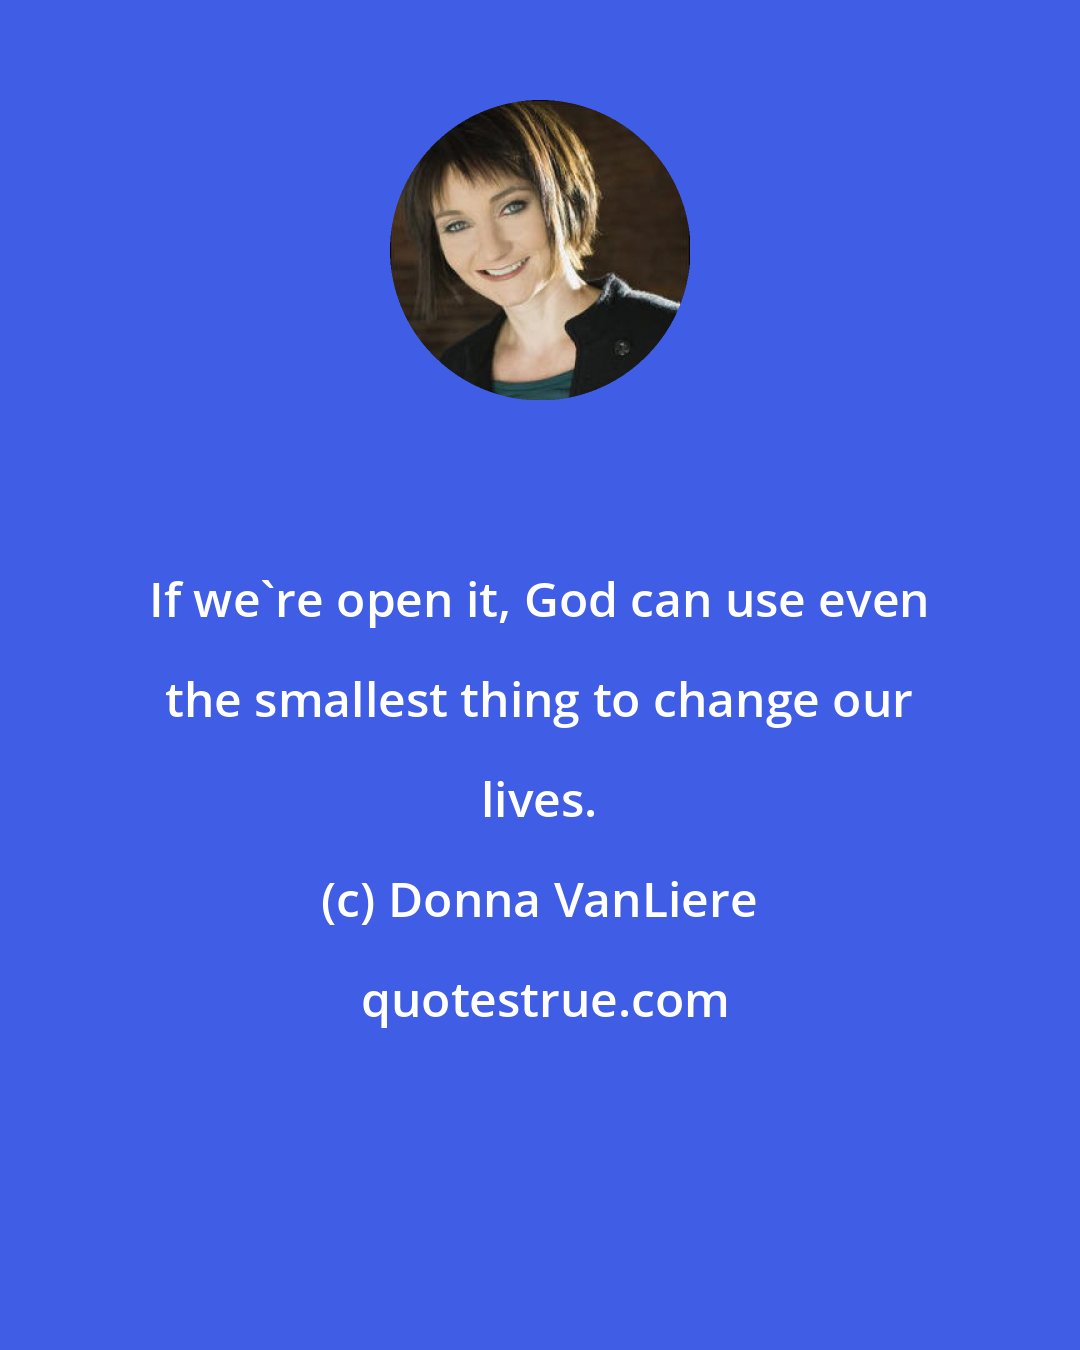 Donna VanLiere: If we're open it, God can use even the smallest thing to change our lives.